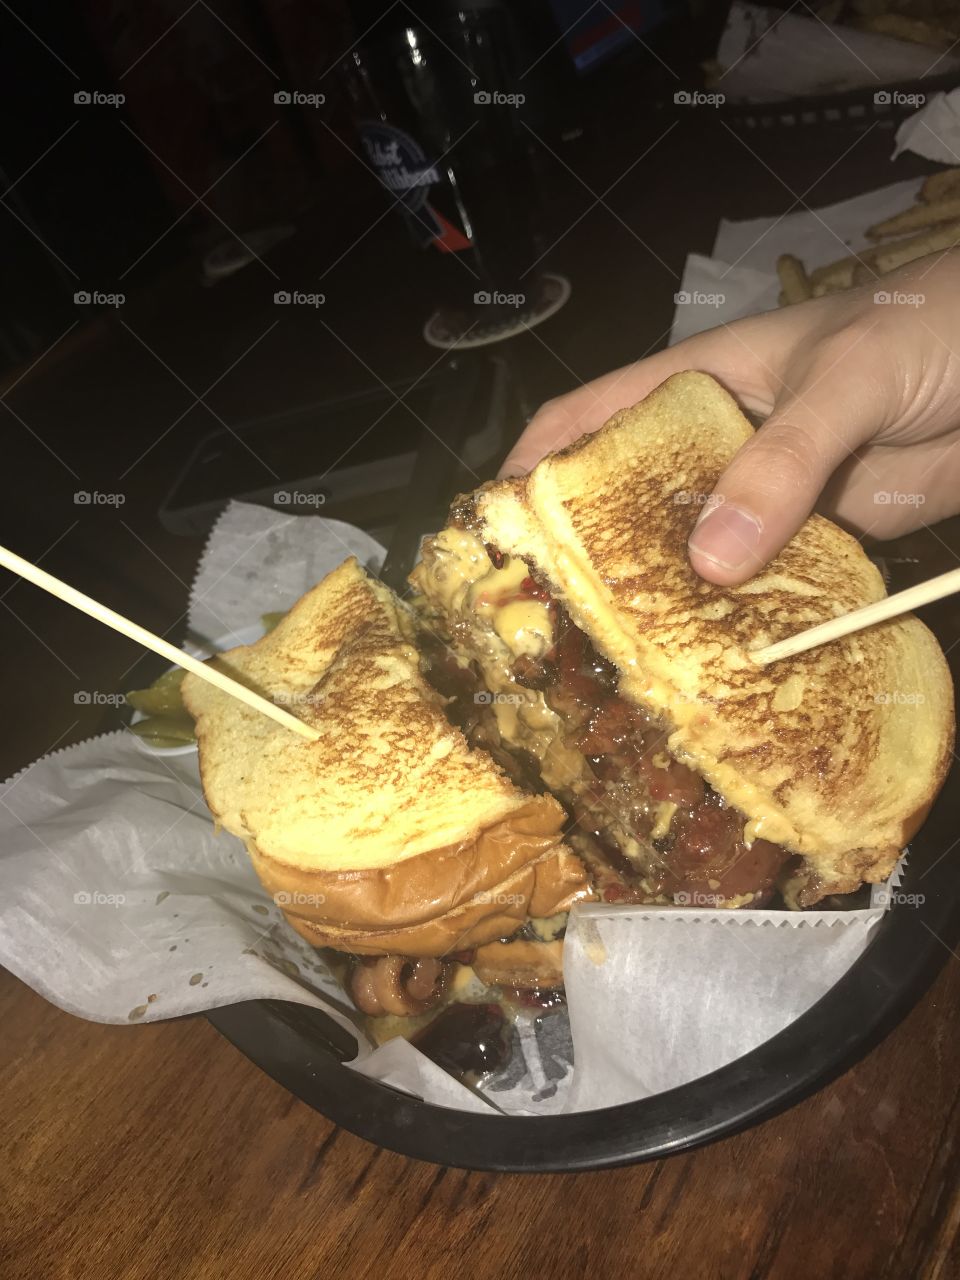 Grilled cheese peanut butter and jelly burger "Elvis burger"